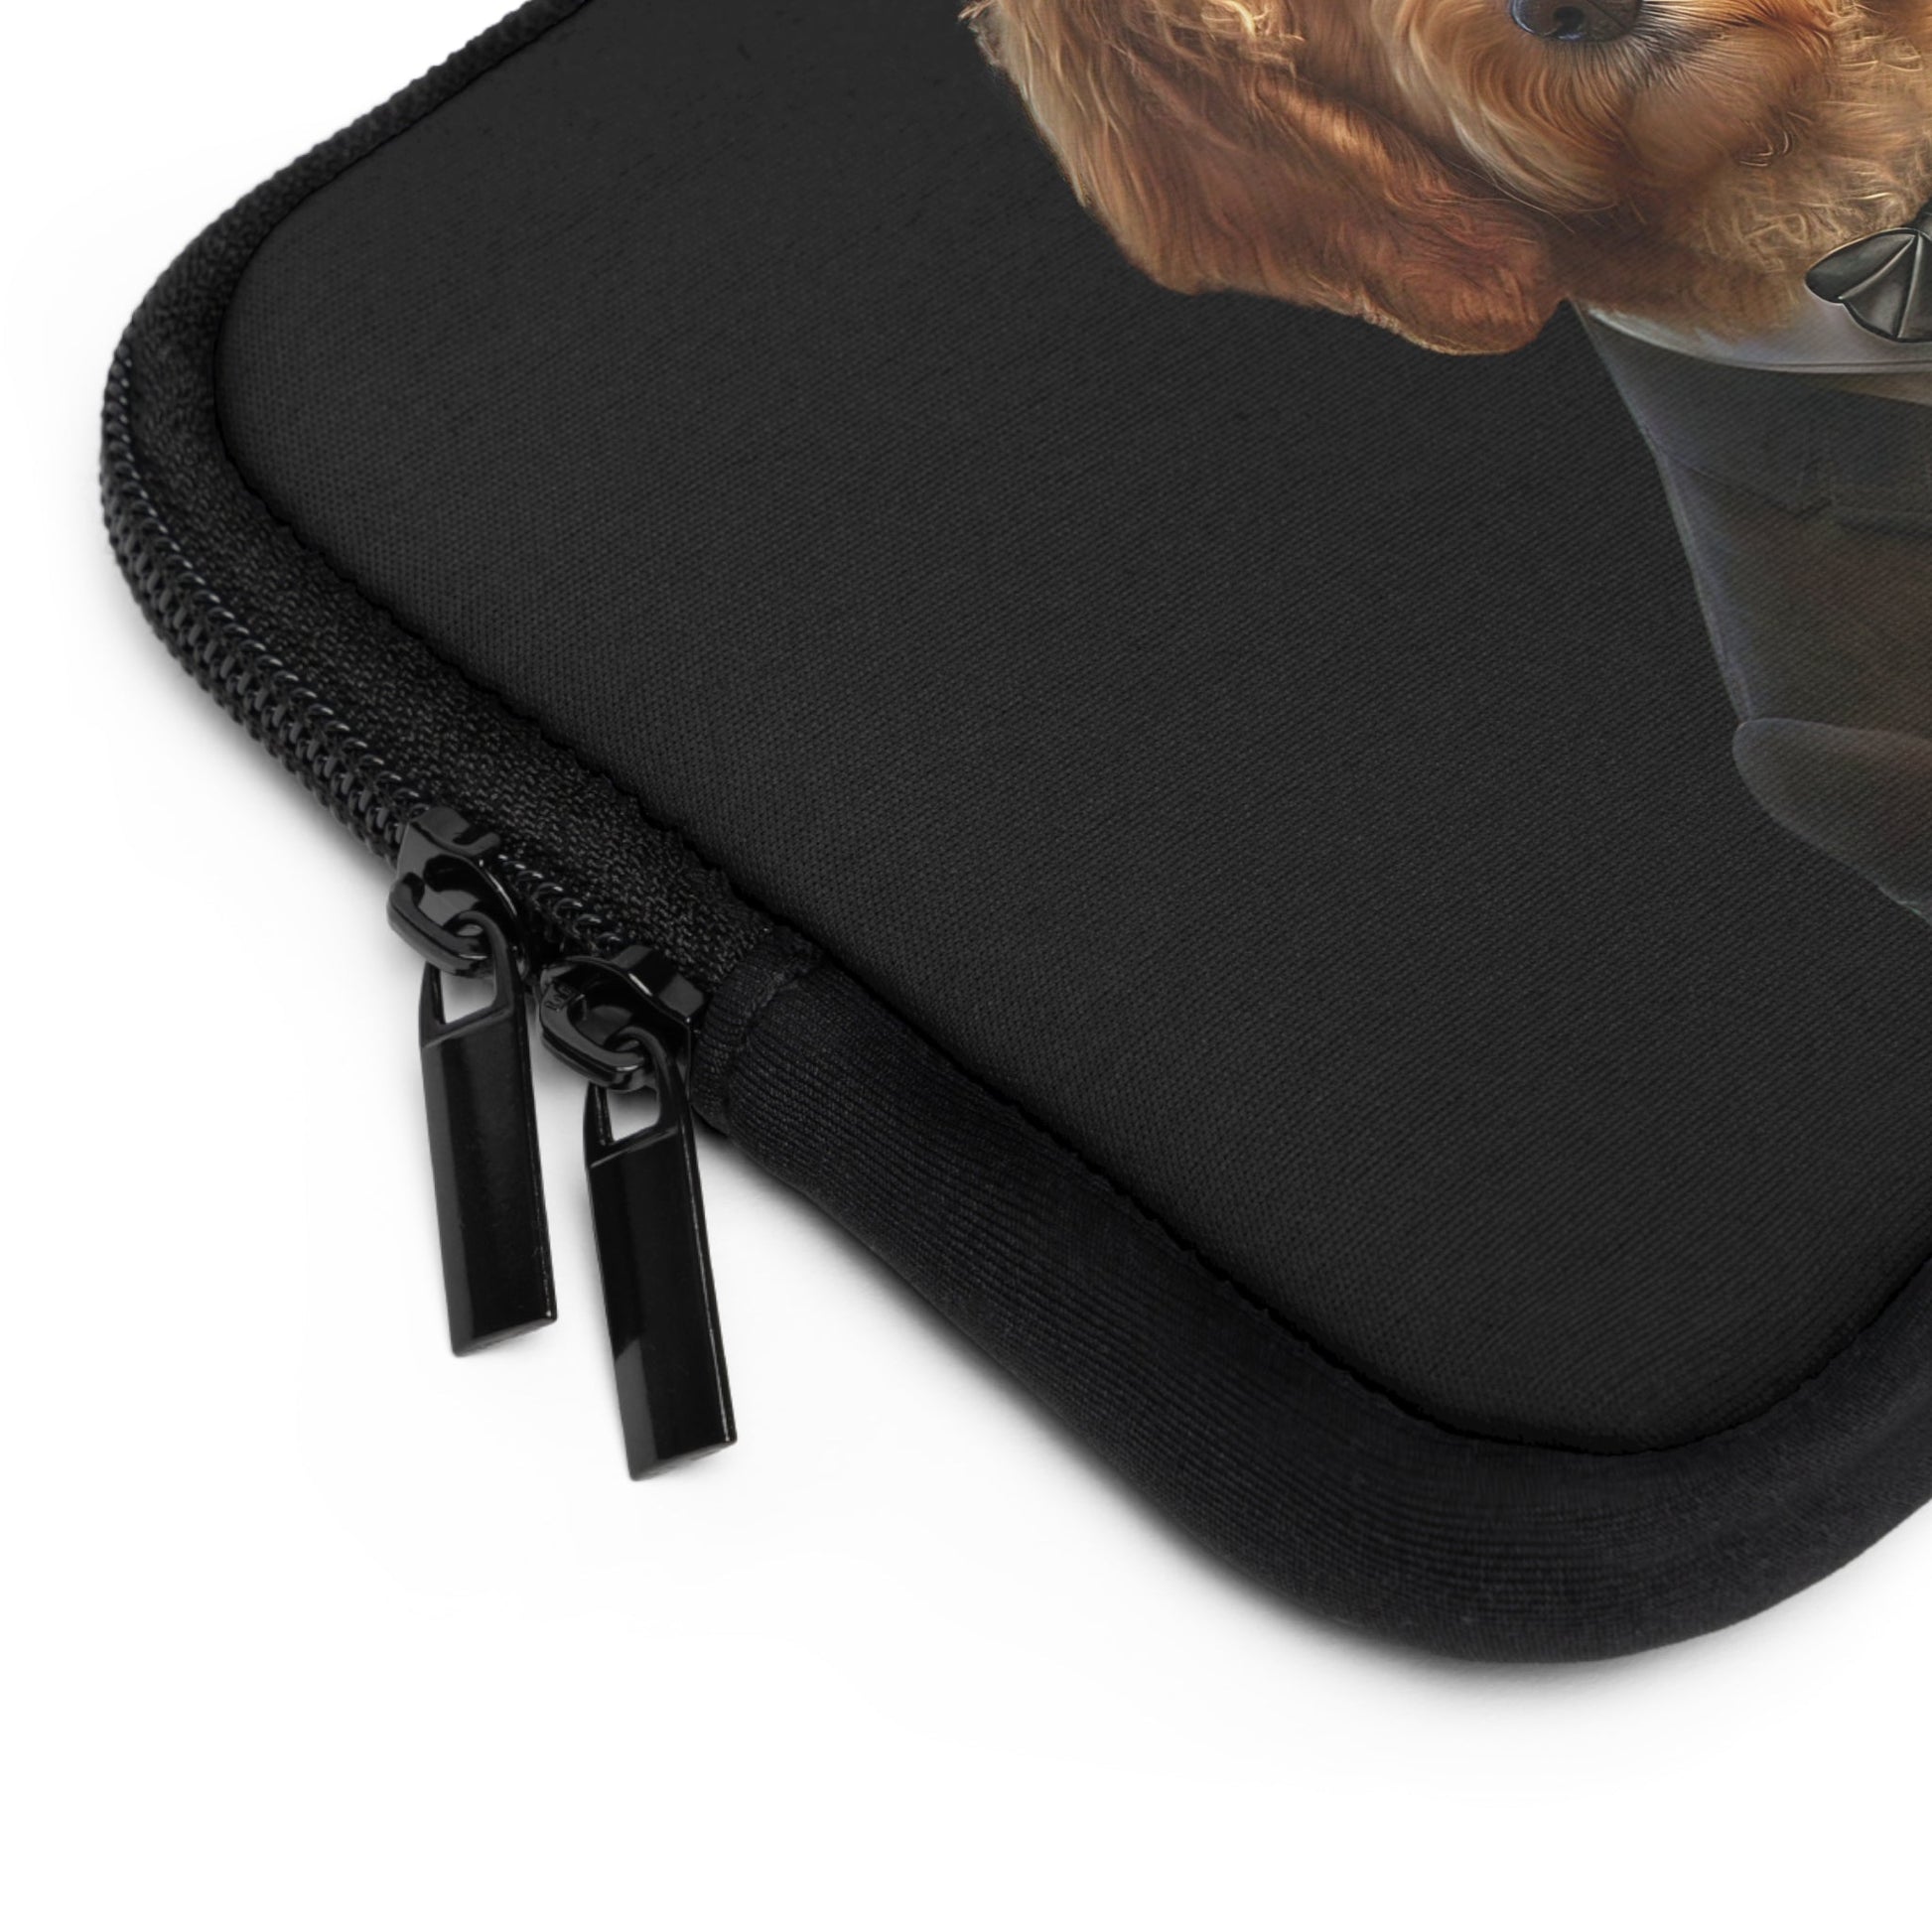 COOPER : Laptop Sleeve - Shaggy Chic